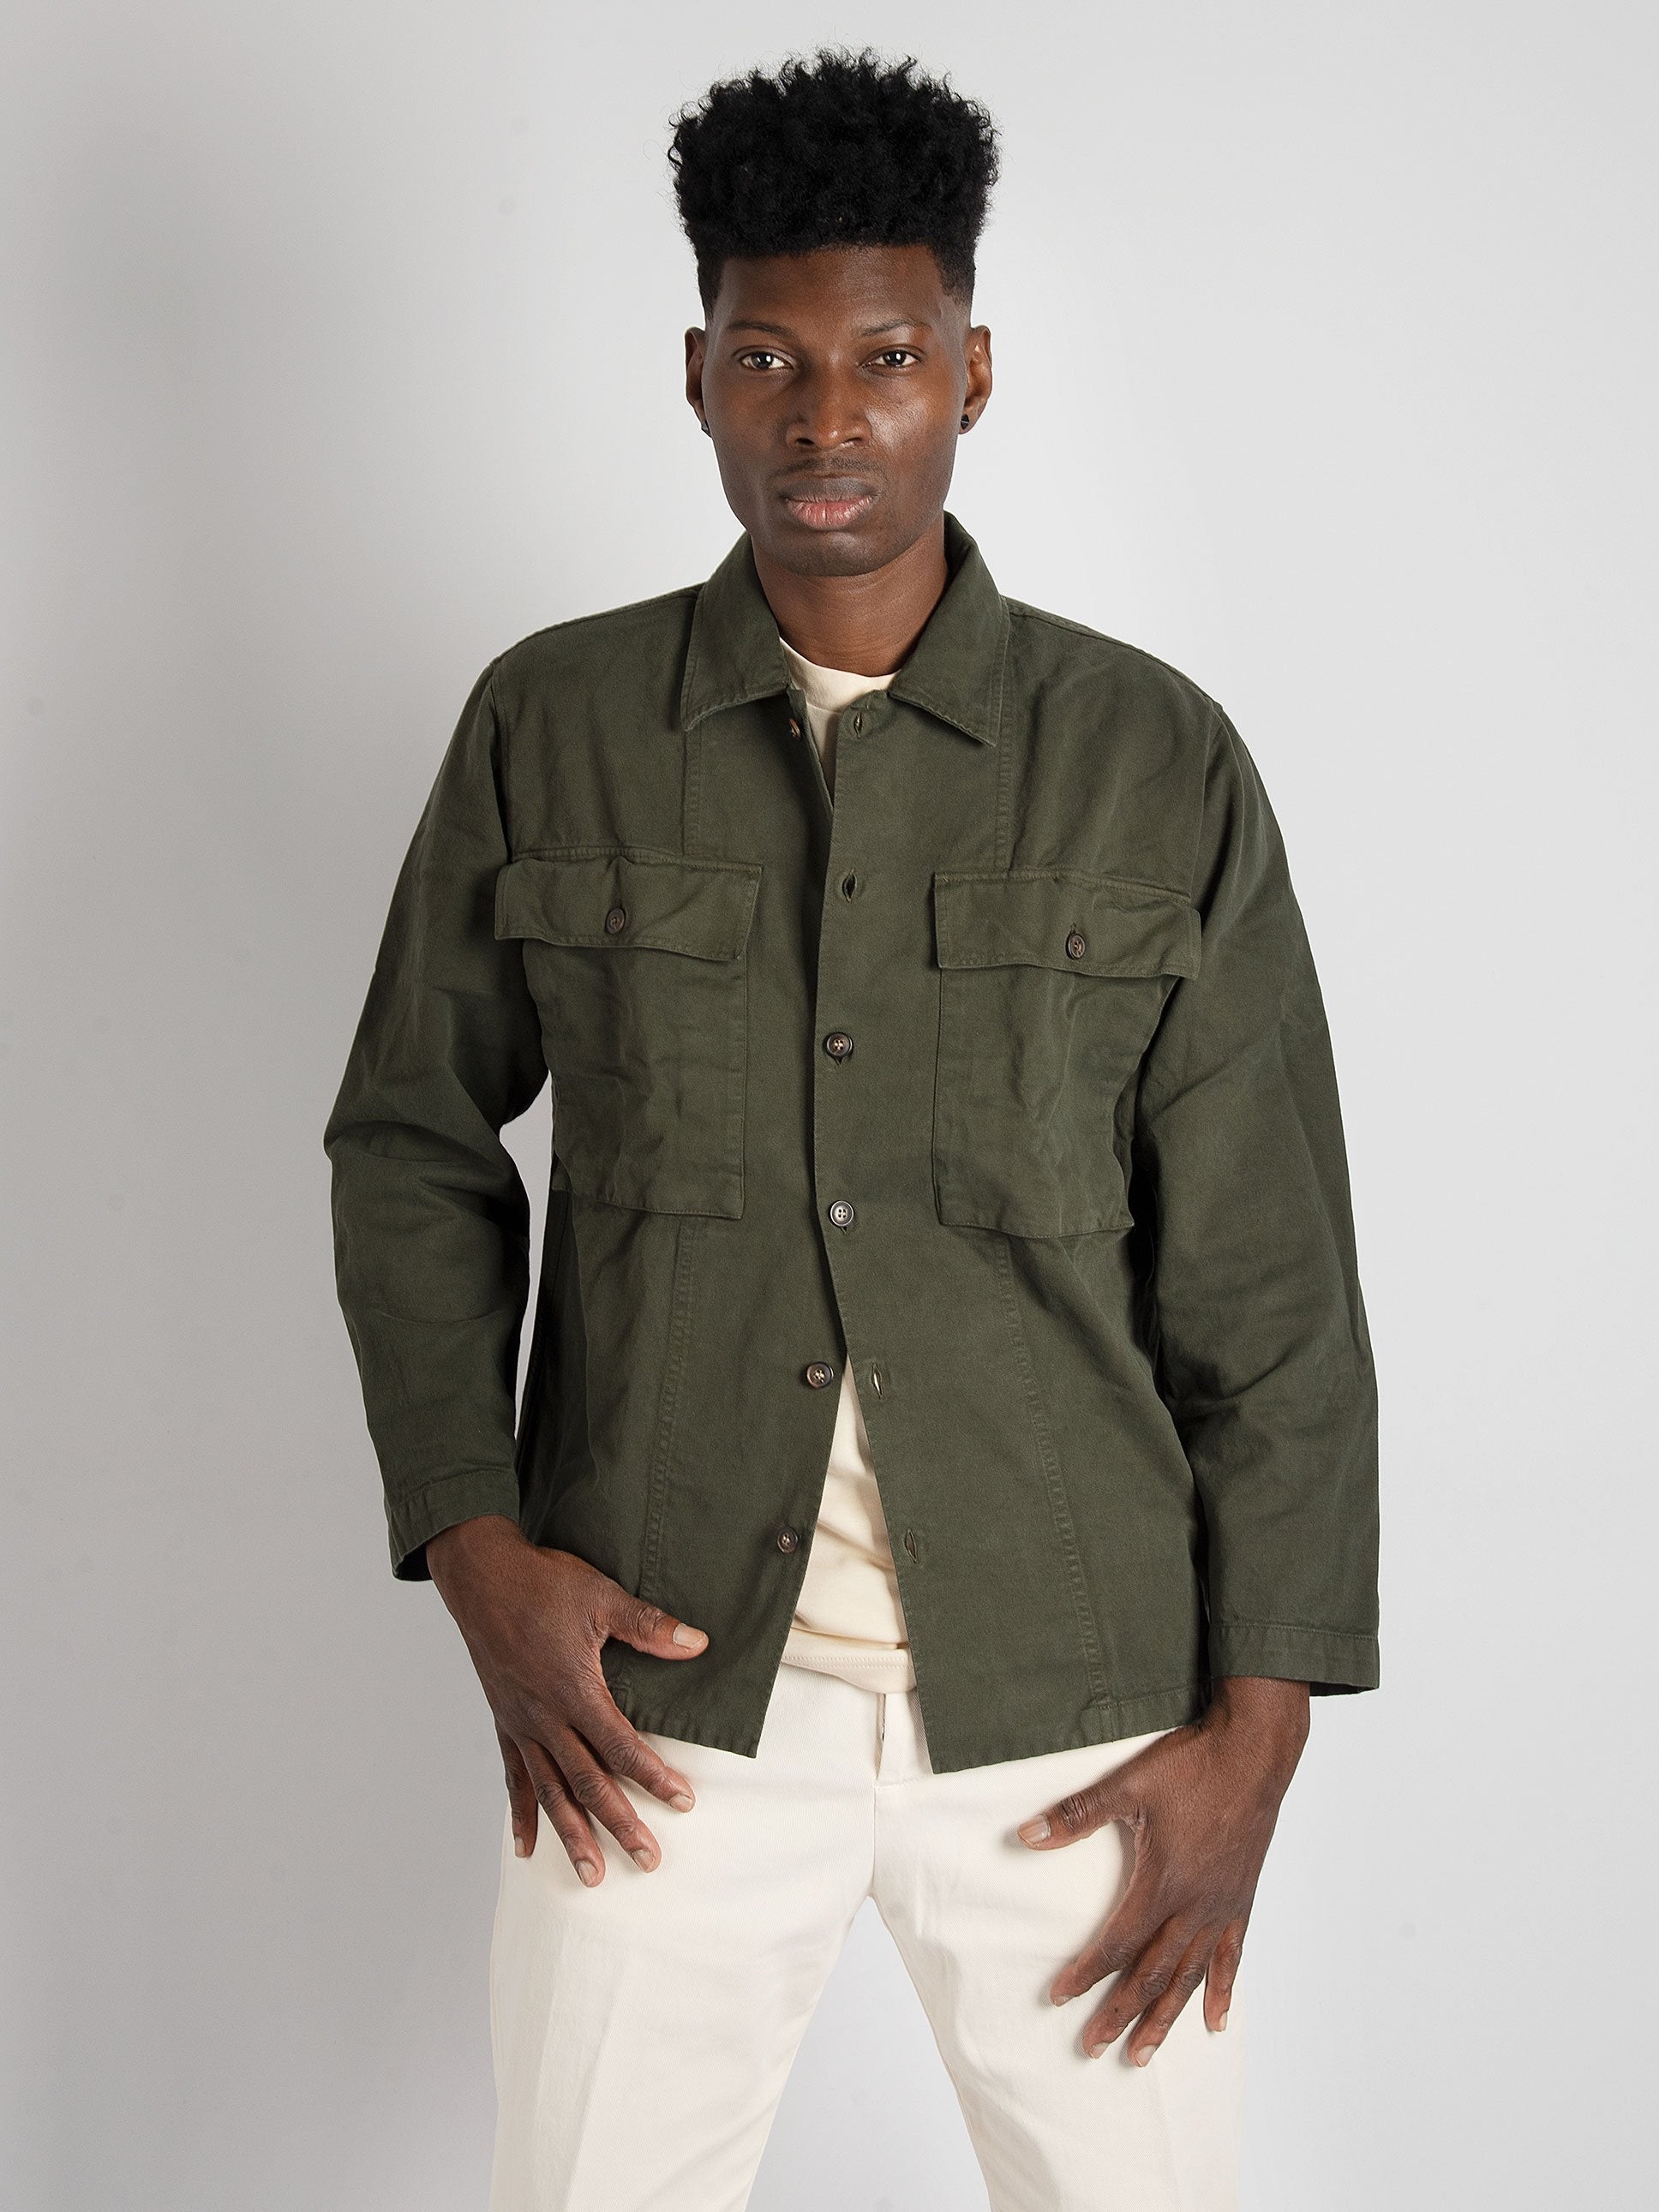 Over Shirt 'Pacific' - Verde Militare